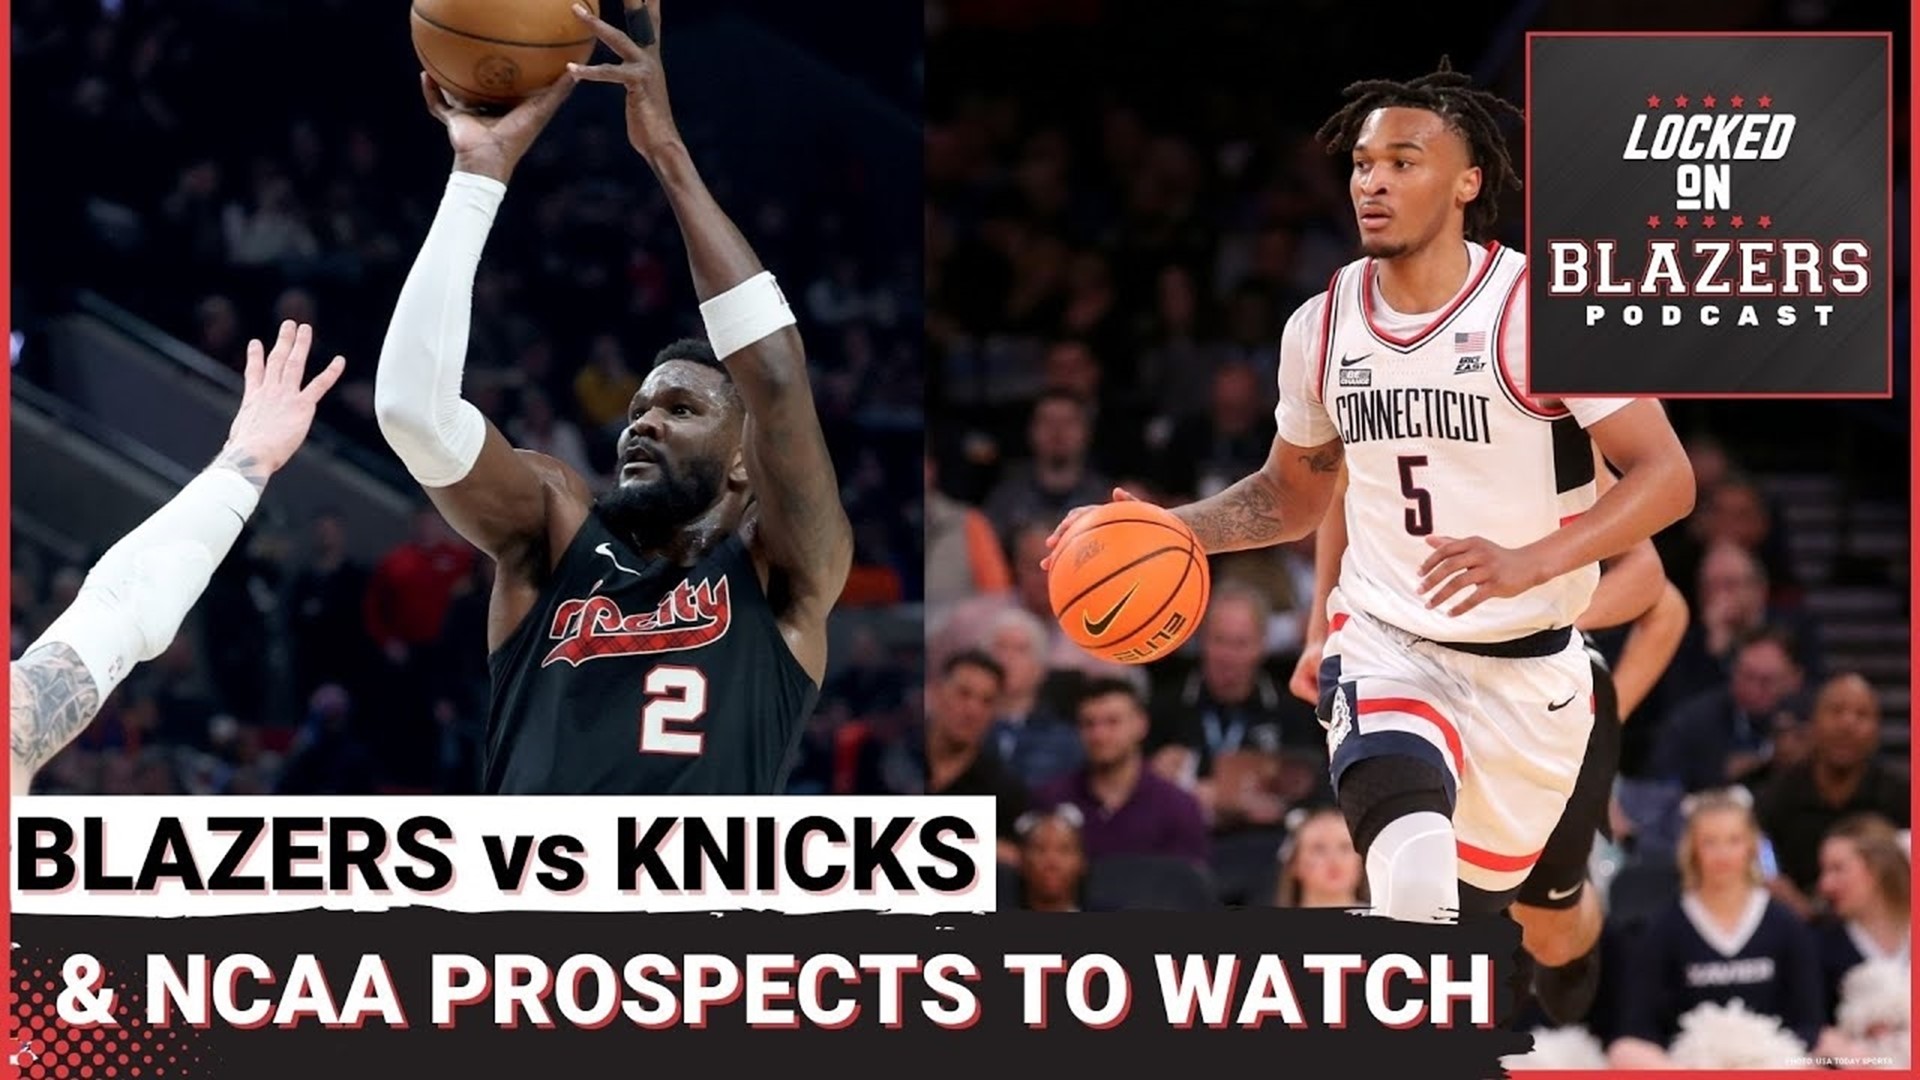 Deandre Ayton continues an impressive March in the Trail Blazers' loss to the New York Knicks. Plus, a full Friday viewers guide to watching NBA prospects.